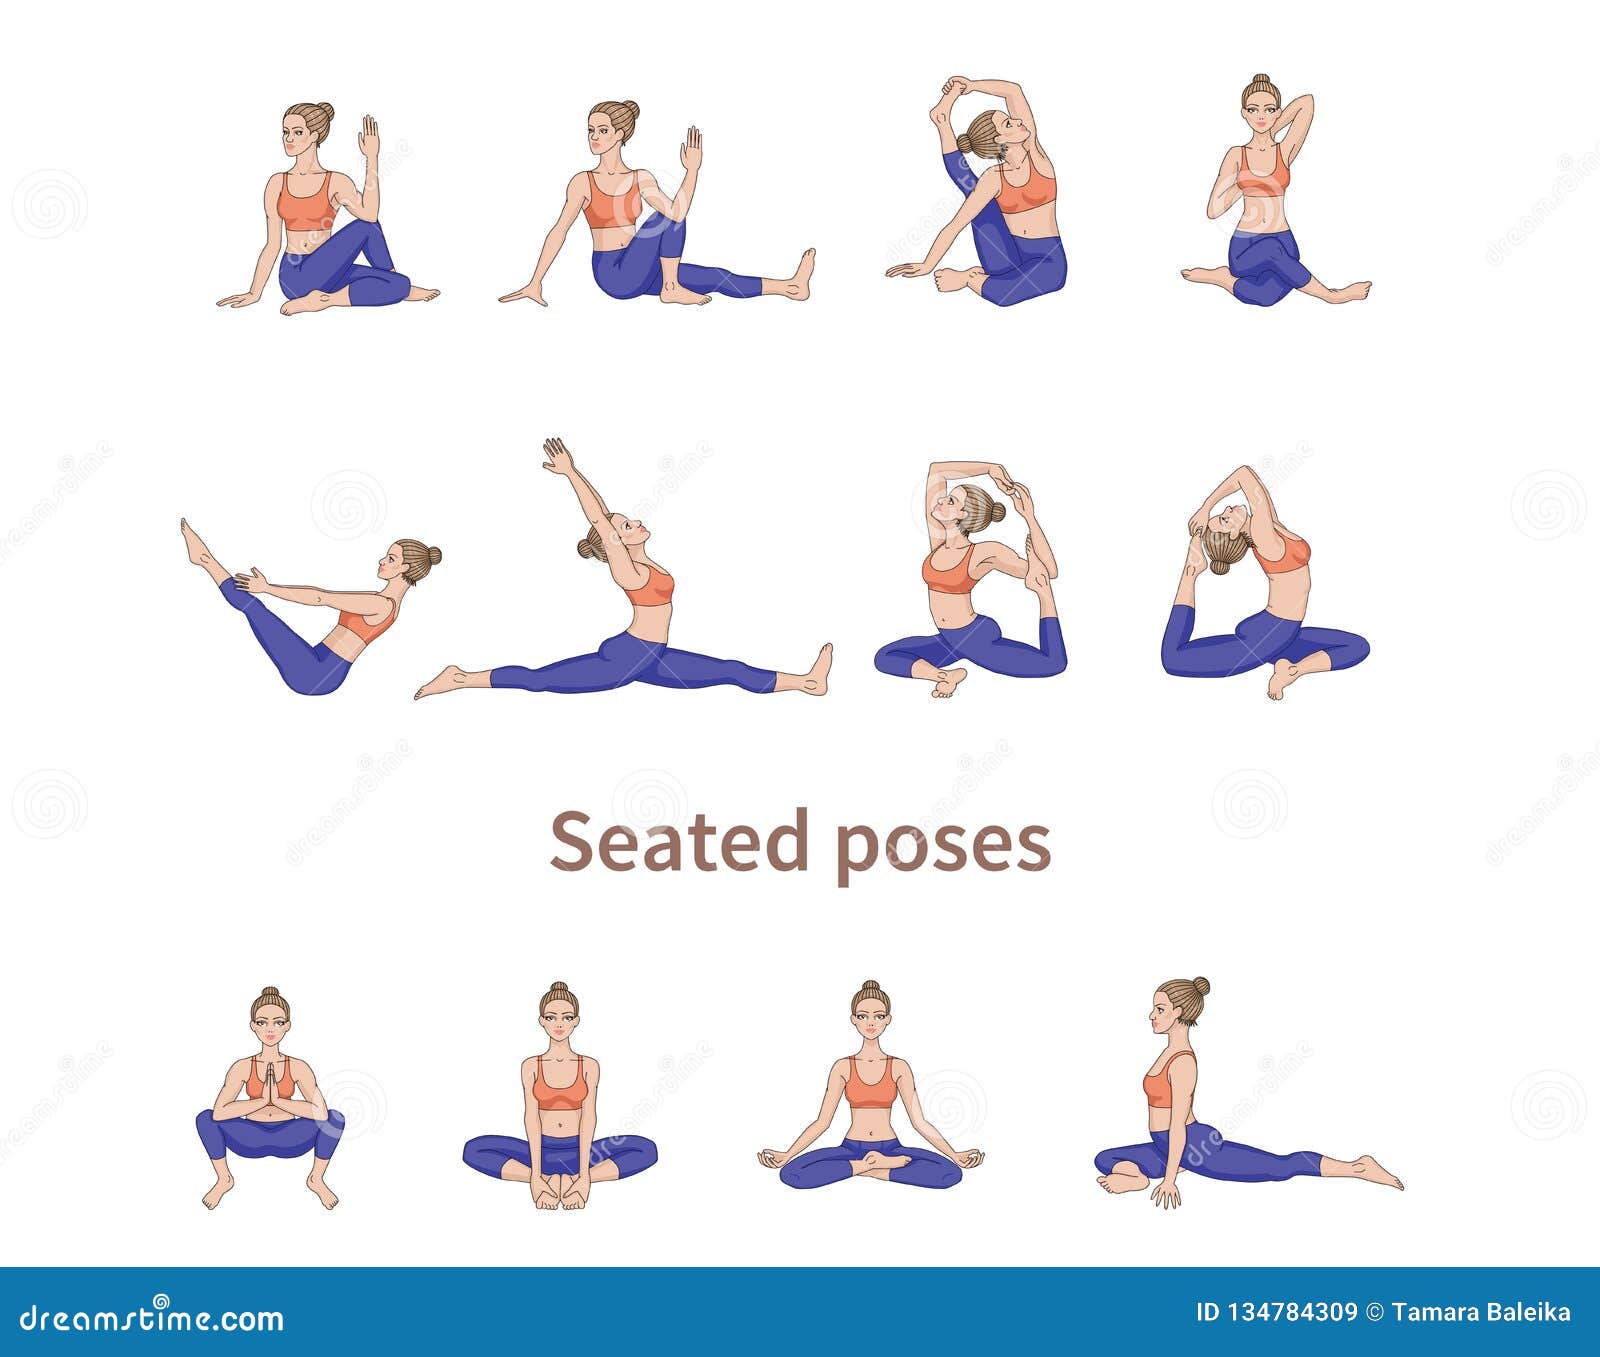 The 18 Best Beginner To Advanced Seated Yoga Poses - The Yoga Nomads